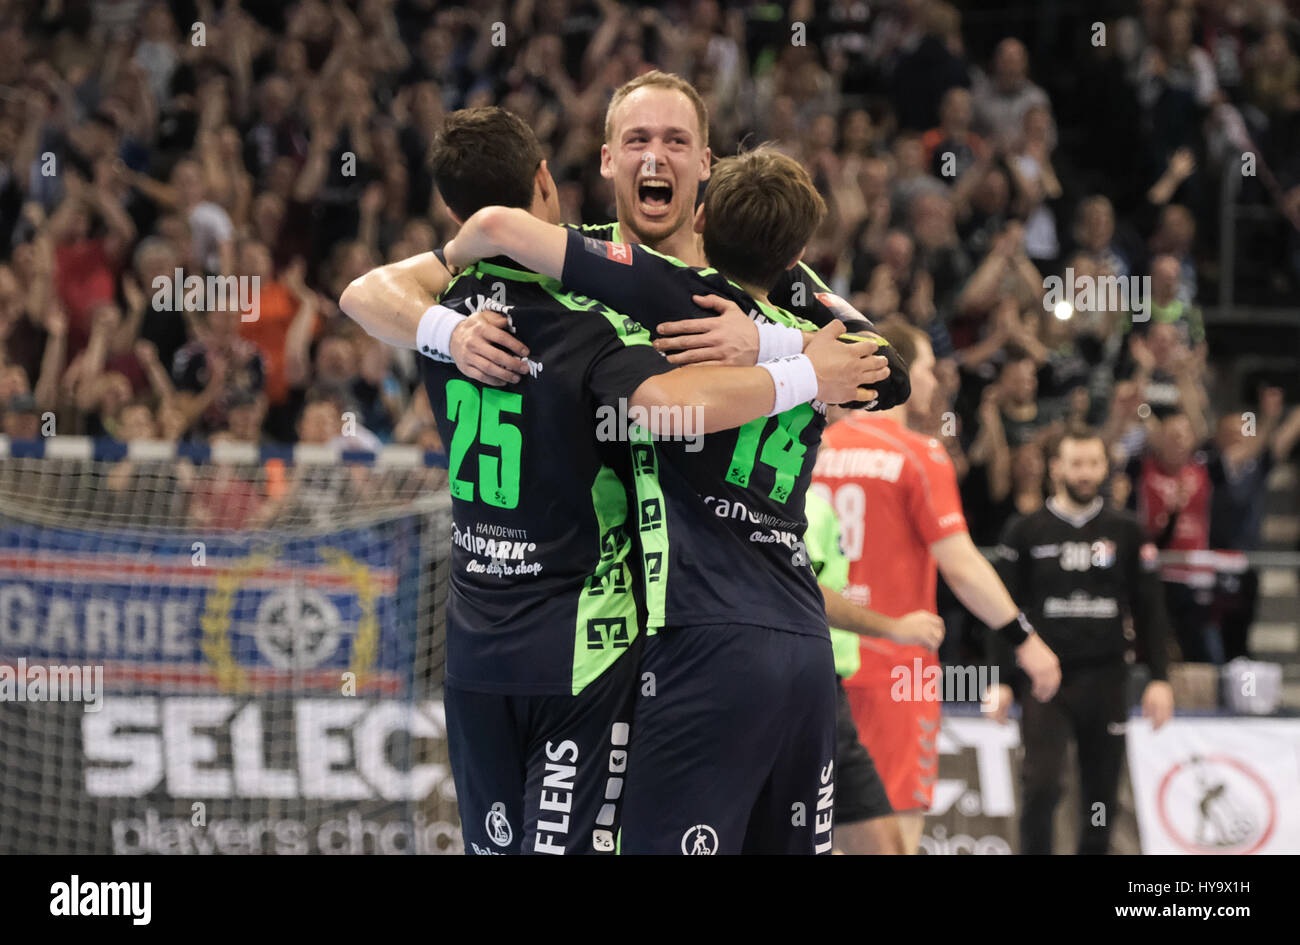 Flensburg's Rasmus Lauge (l-r), Henrik Toft-Hansen and Hampus Wanne celebrate the victory after the Handball Champions League knock-out round quarterfinals qualification second leg match between SG Flensburg-Handewitt and HC Brest at the Flens-Arena in Flensburg, Germany, 2 April 2017. Photo: Axel Heimken/dpa Stock Photo